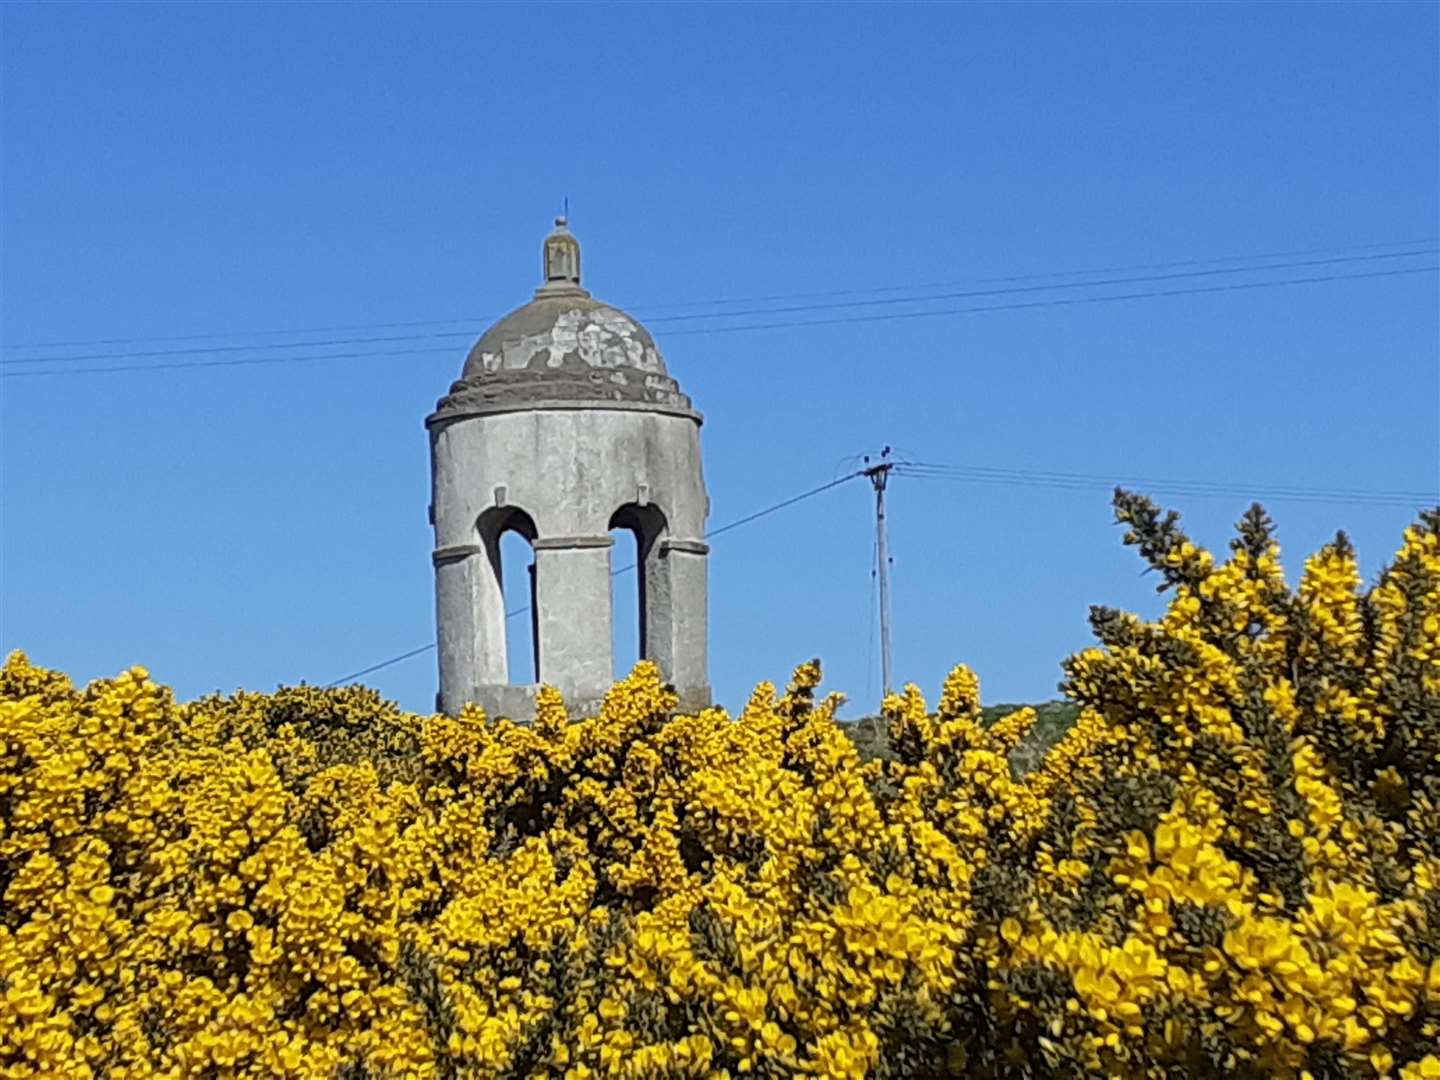 The Temple of Venus surrounded by bright yellow gorse.